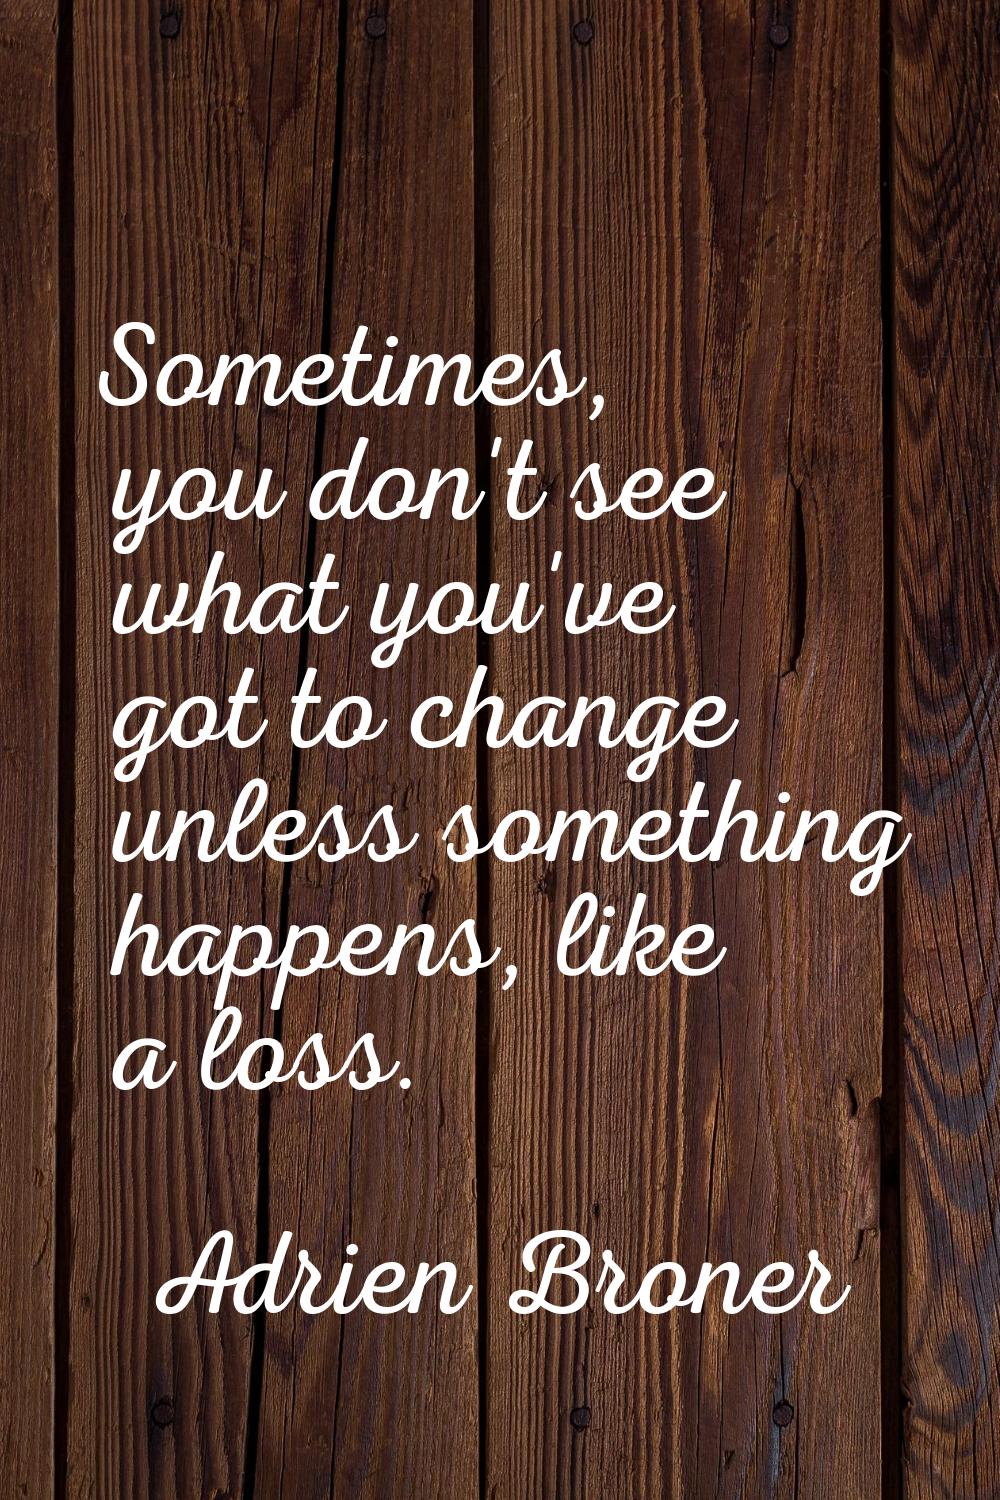 Sometimes, you don't see what you've got to change unless something happens, like a loss.